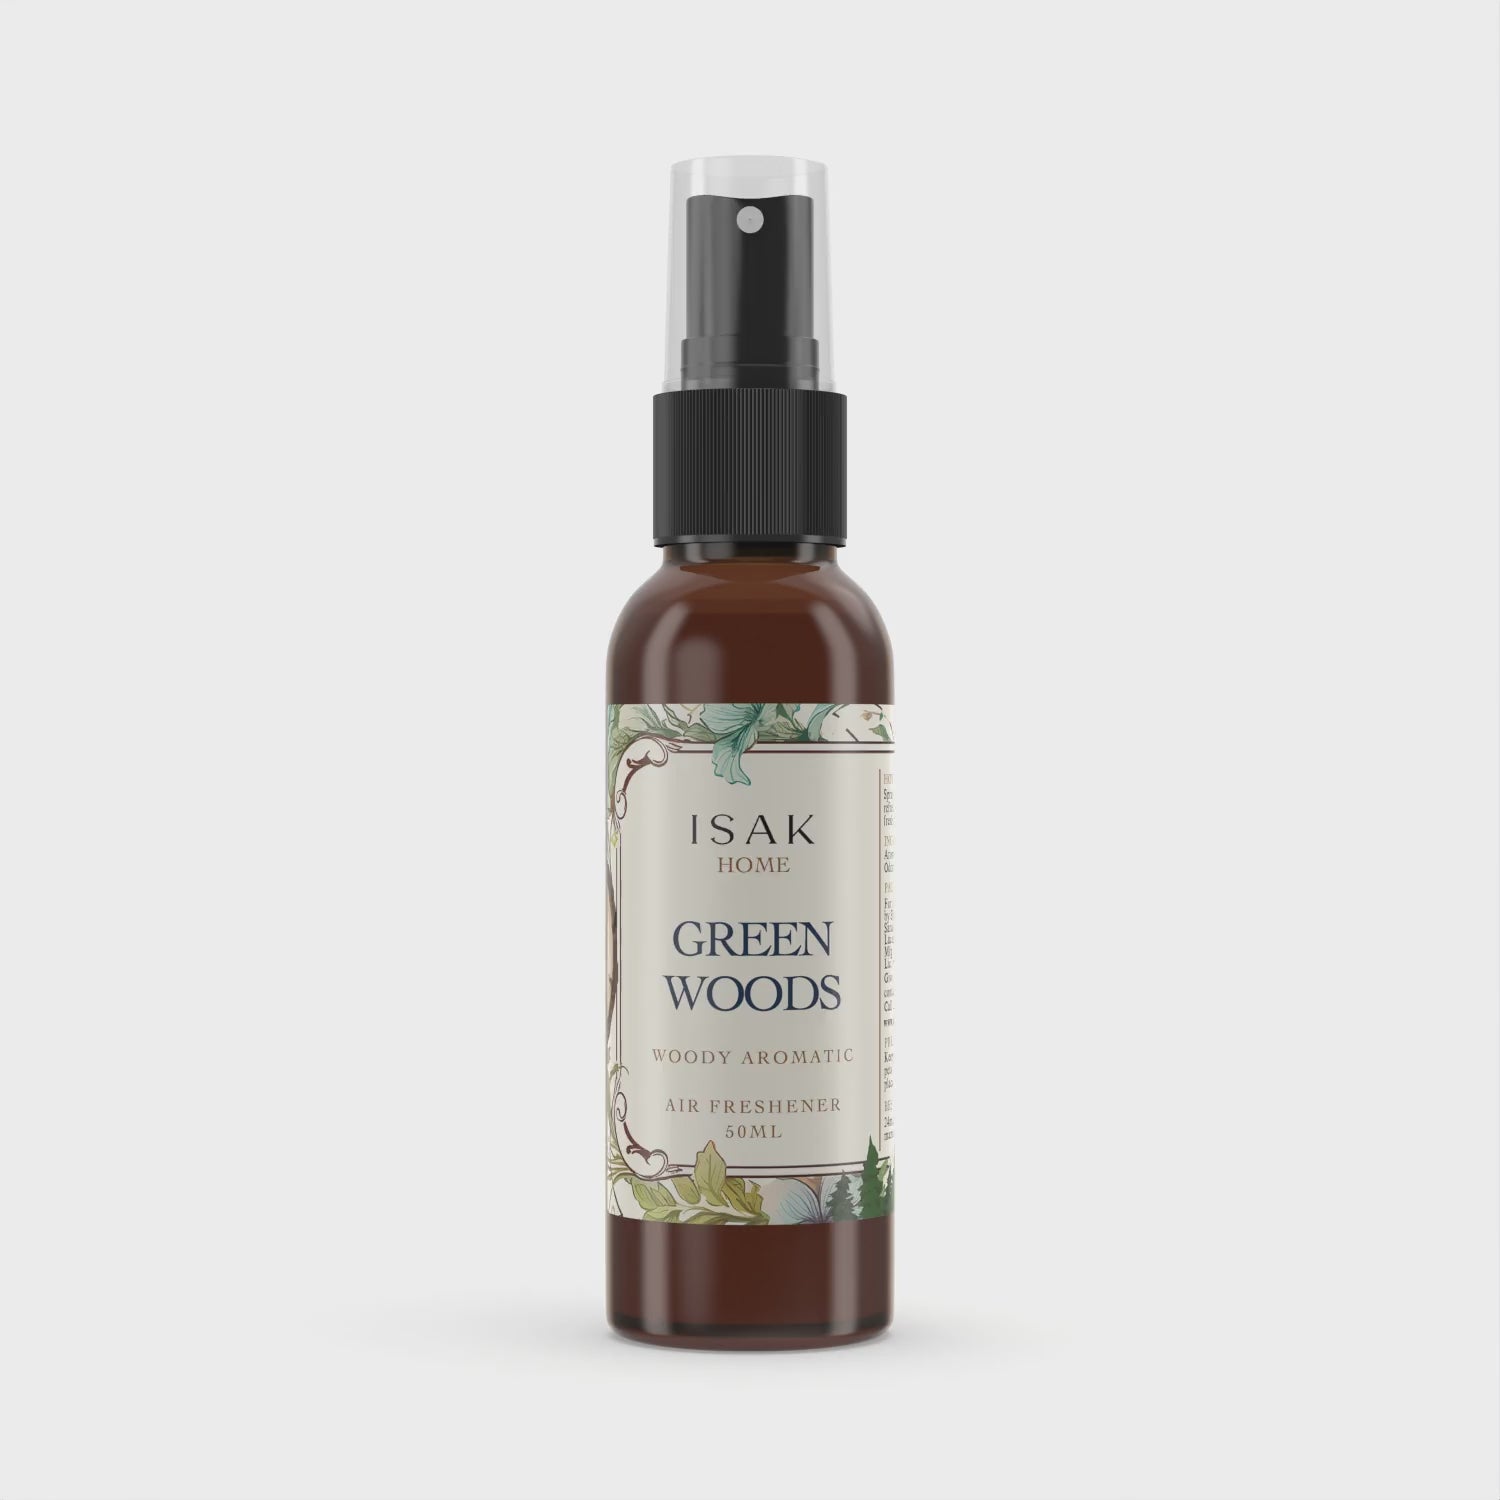 Green Woods Air Freshener home scent